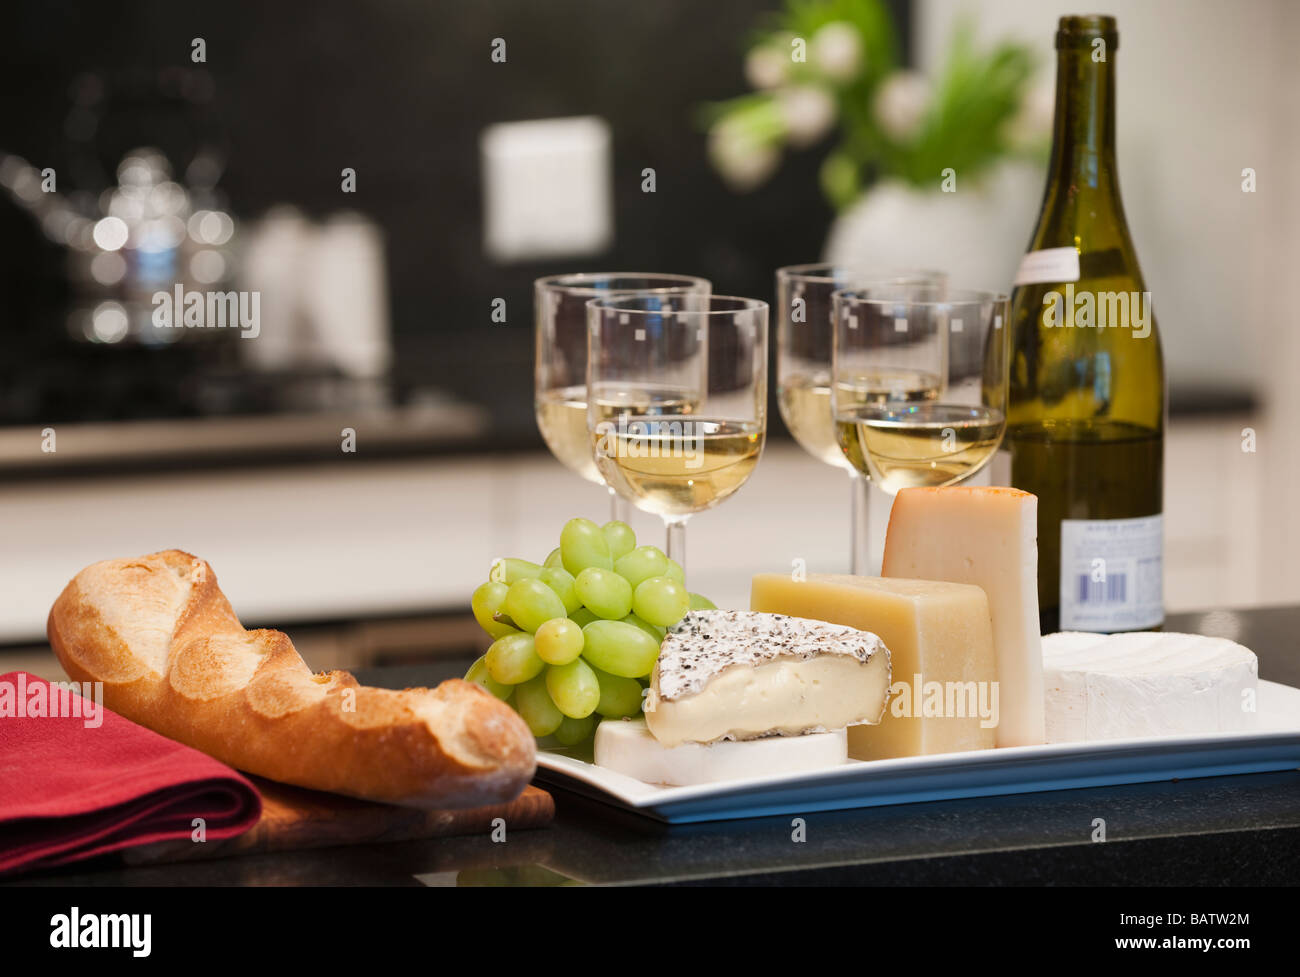 Cheeses and wine on kitchen worktop Stock Photo